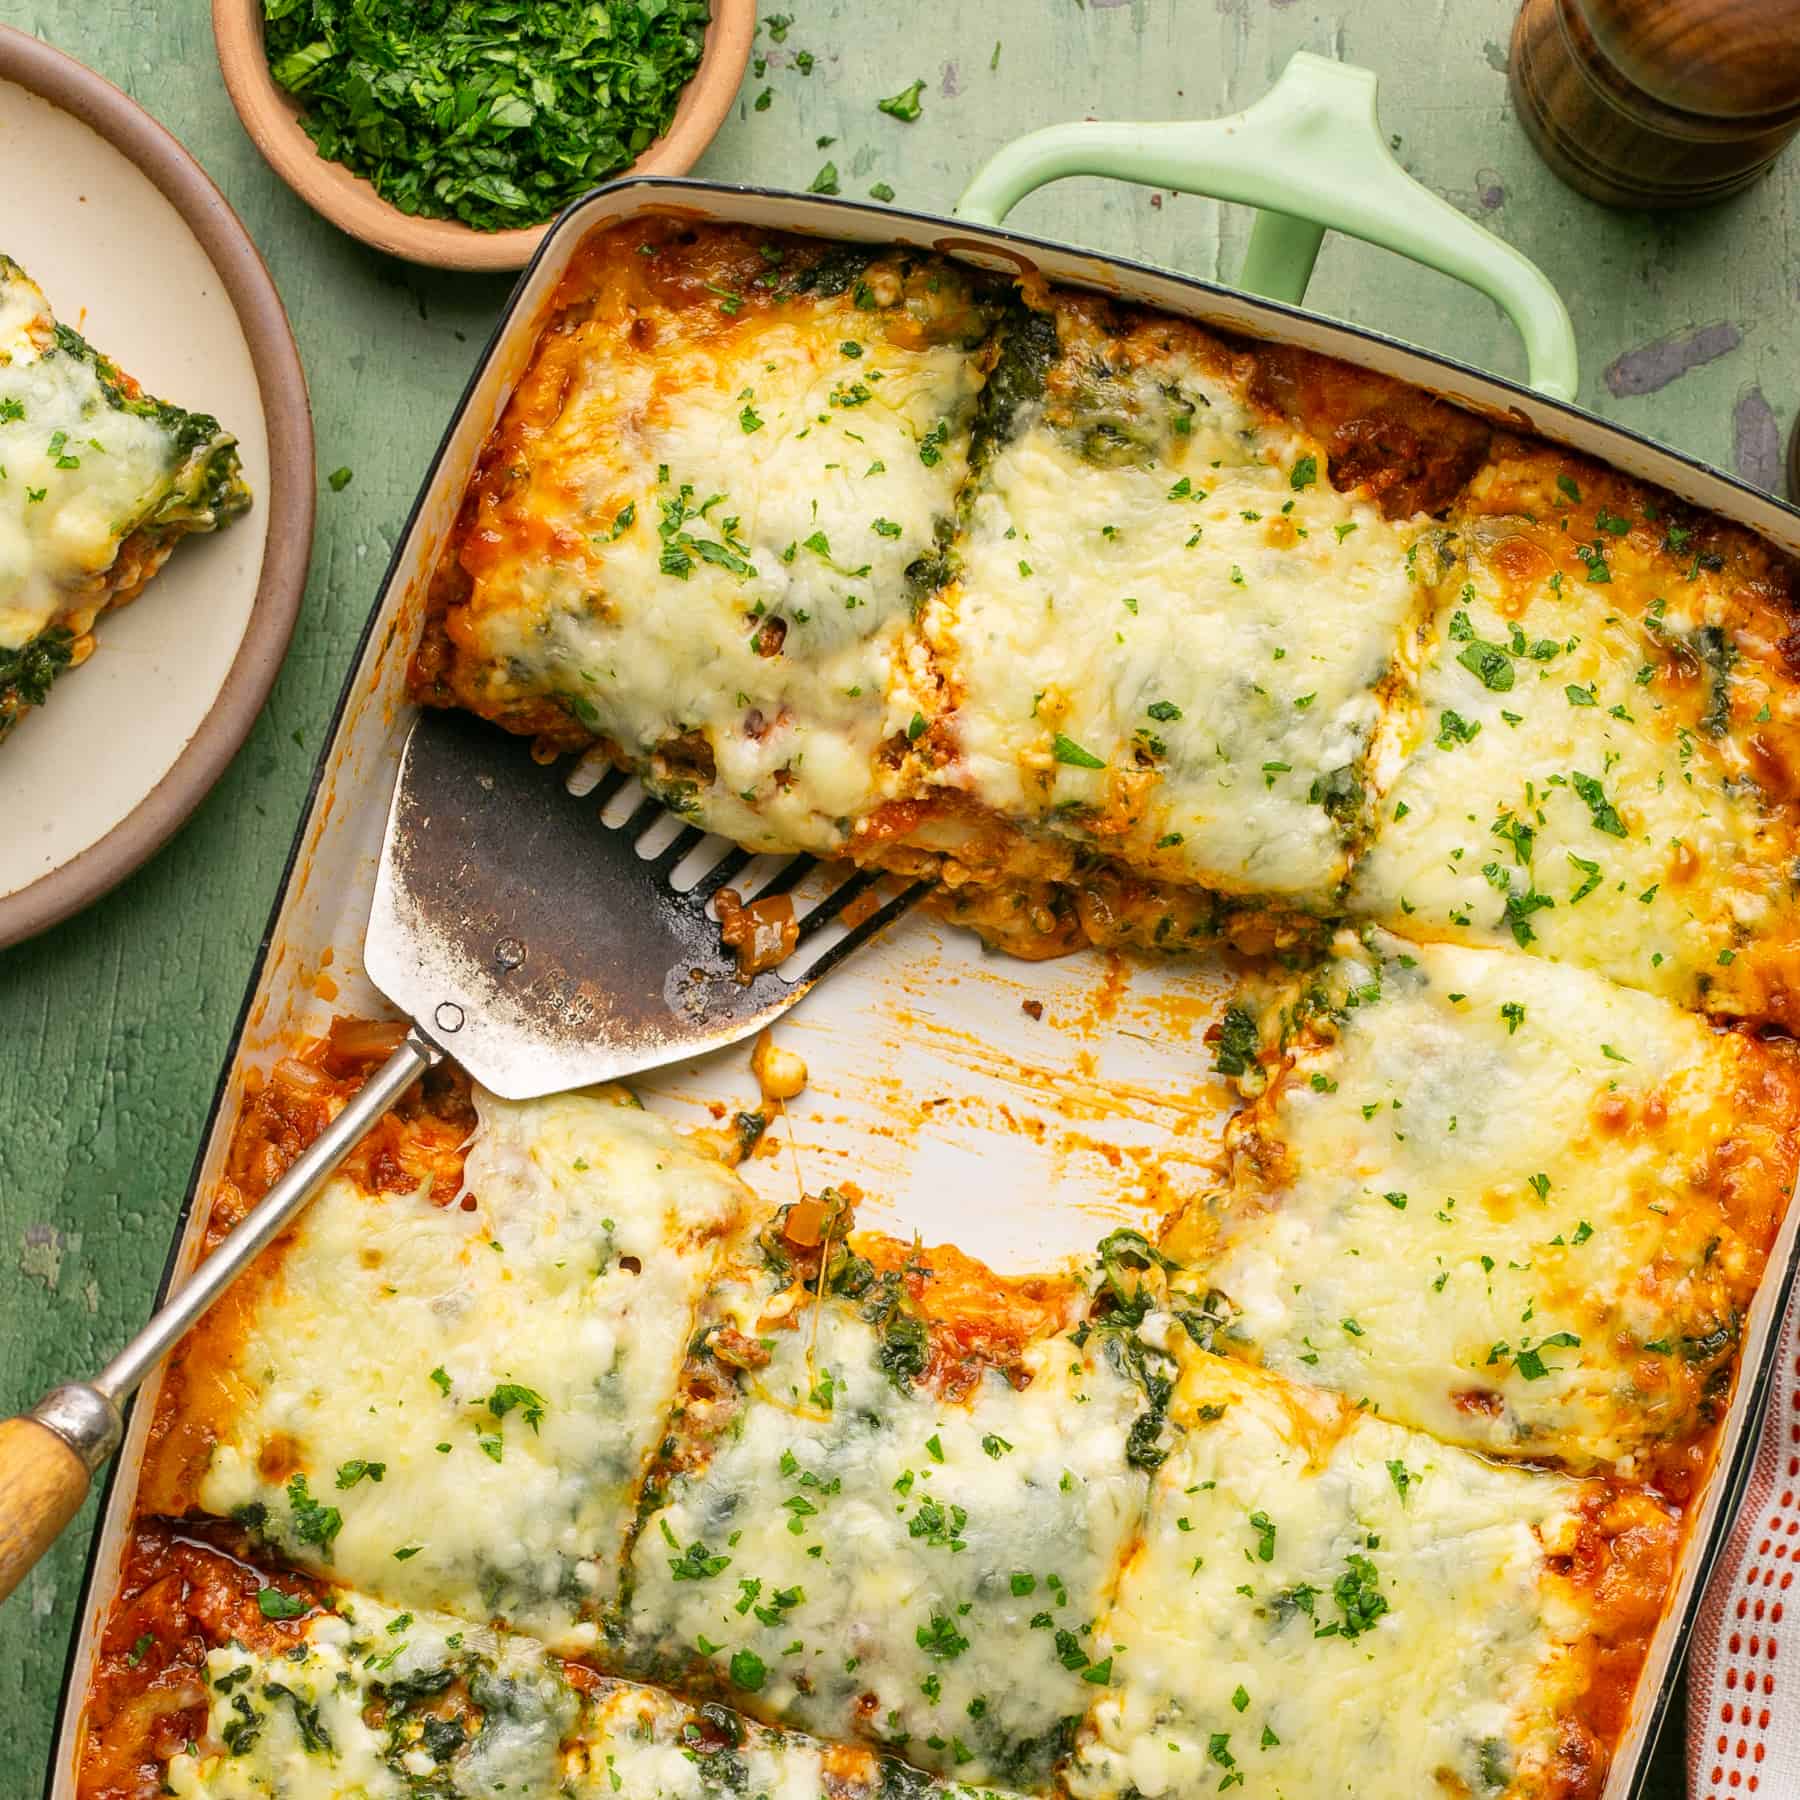 Beefy Cottage Cheese and Spinach Lasagna (oven ready noodles)